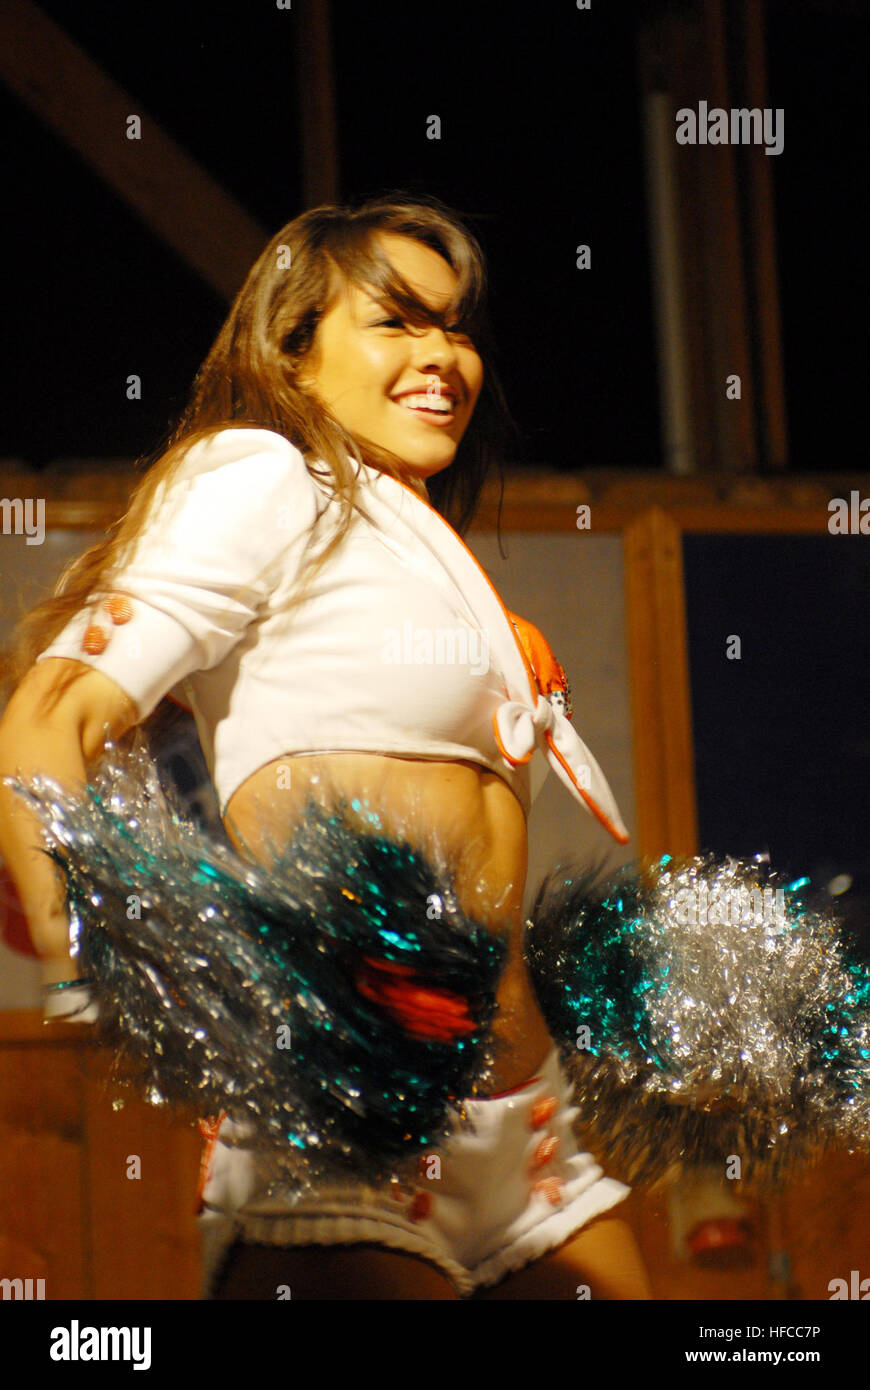 Miami Dolphins' cheerleaders entertained Soldiers, Sailors, Marines and Airmen on a tour of the area. They performed a few dance routines and signed autographs for the troops. Miami Dolphins' Cheerleaders 76736 Stock Photo